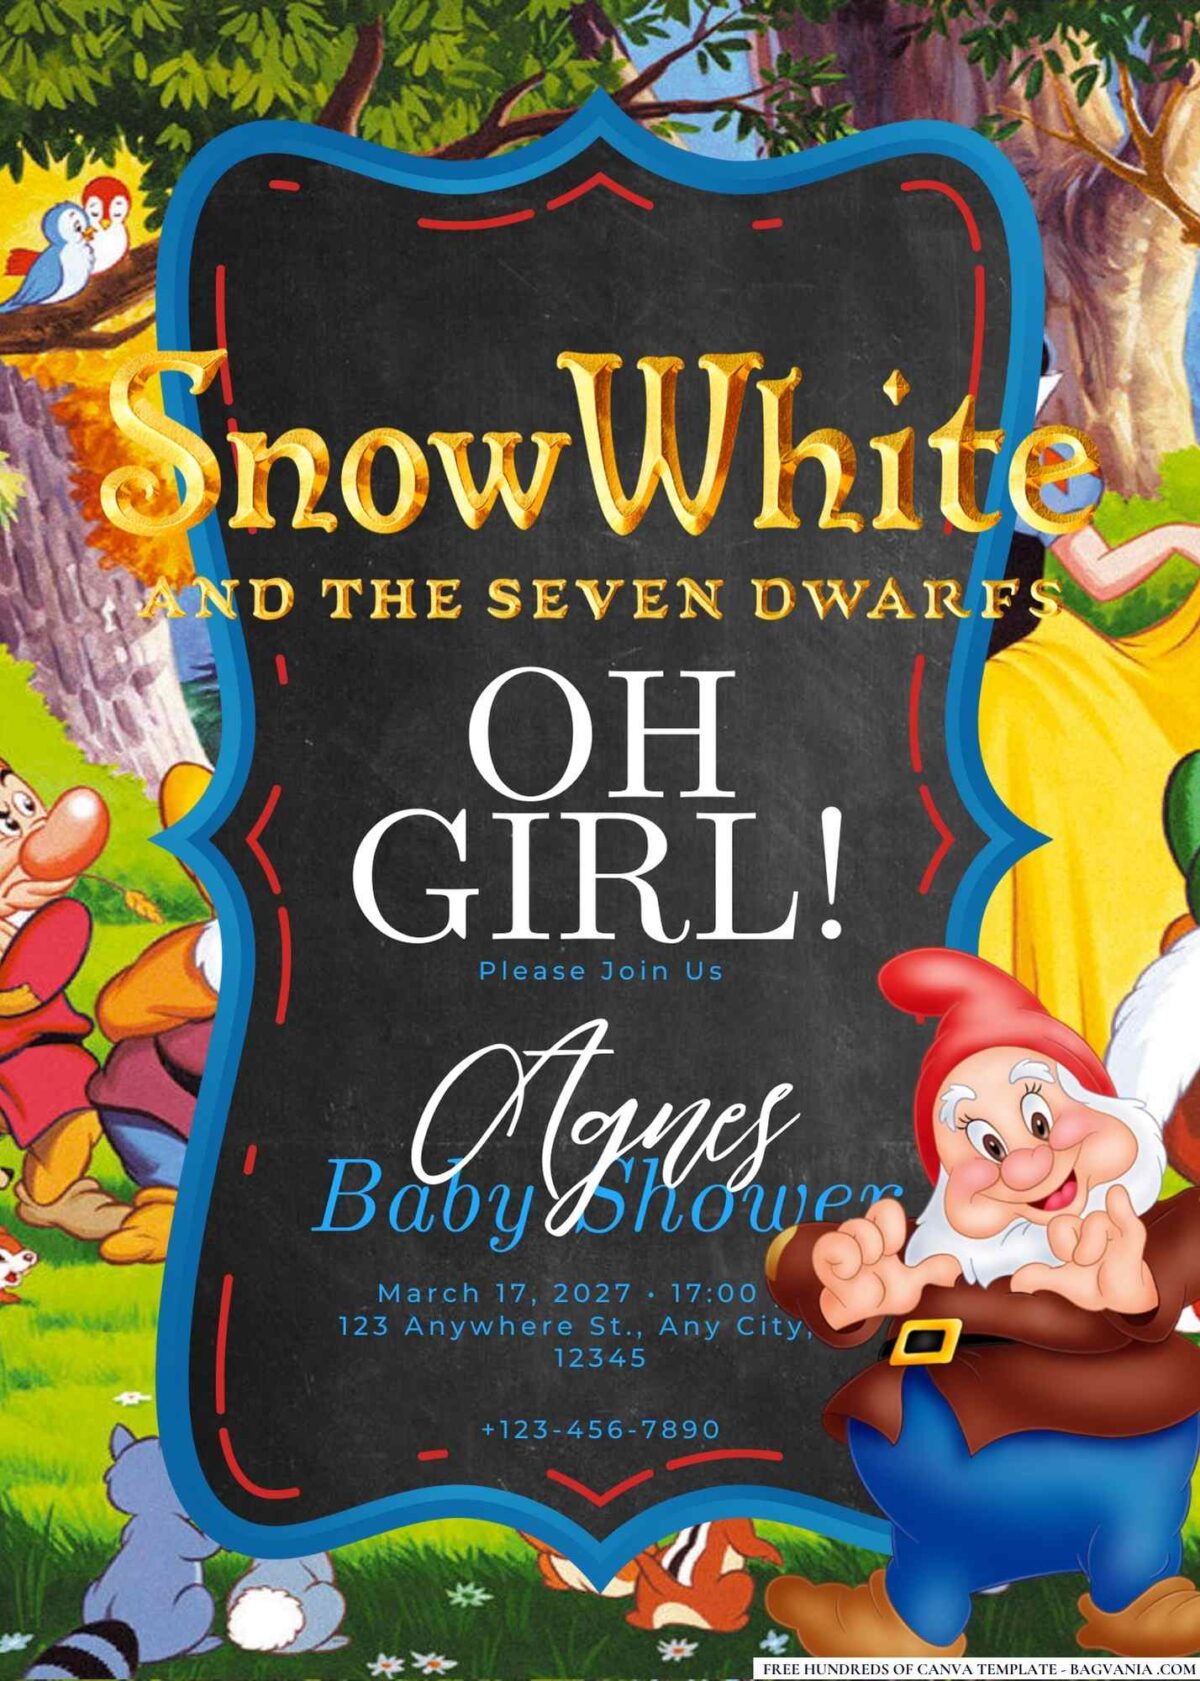 FREE Editable Snow White and the Seven Dwarfs Baby Shower Invitation